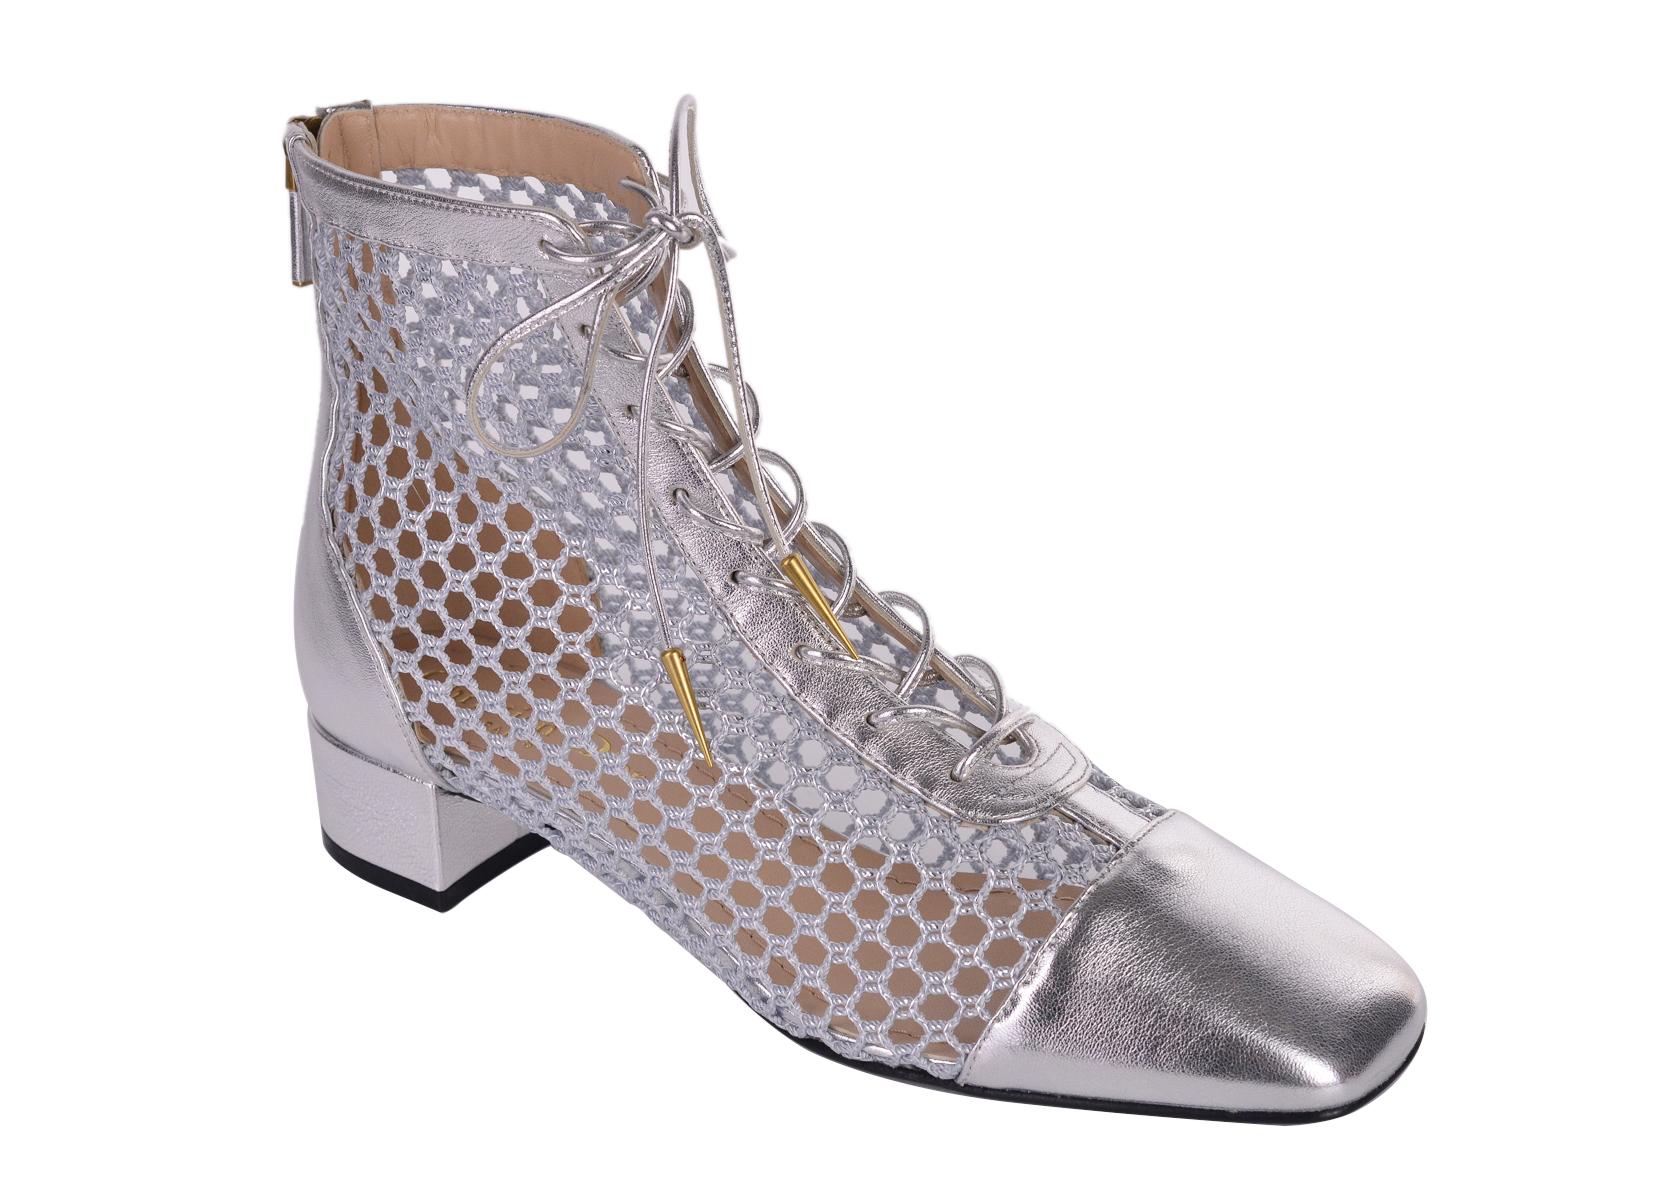 Christian Dior's Naughtily-D ankle boots. These boots feature an all over metallic laminated design for this eccentric ankle boot. Perfect stand out shoes for that accented accessorie in your everyday wardrobe. 

Christian Dior's Naughtily-D ankle